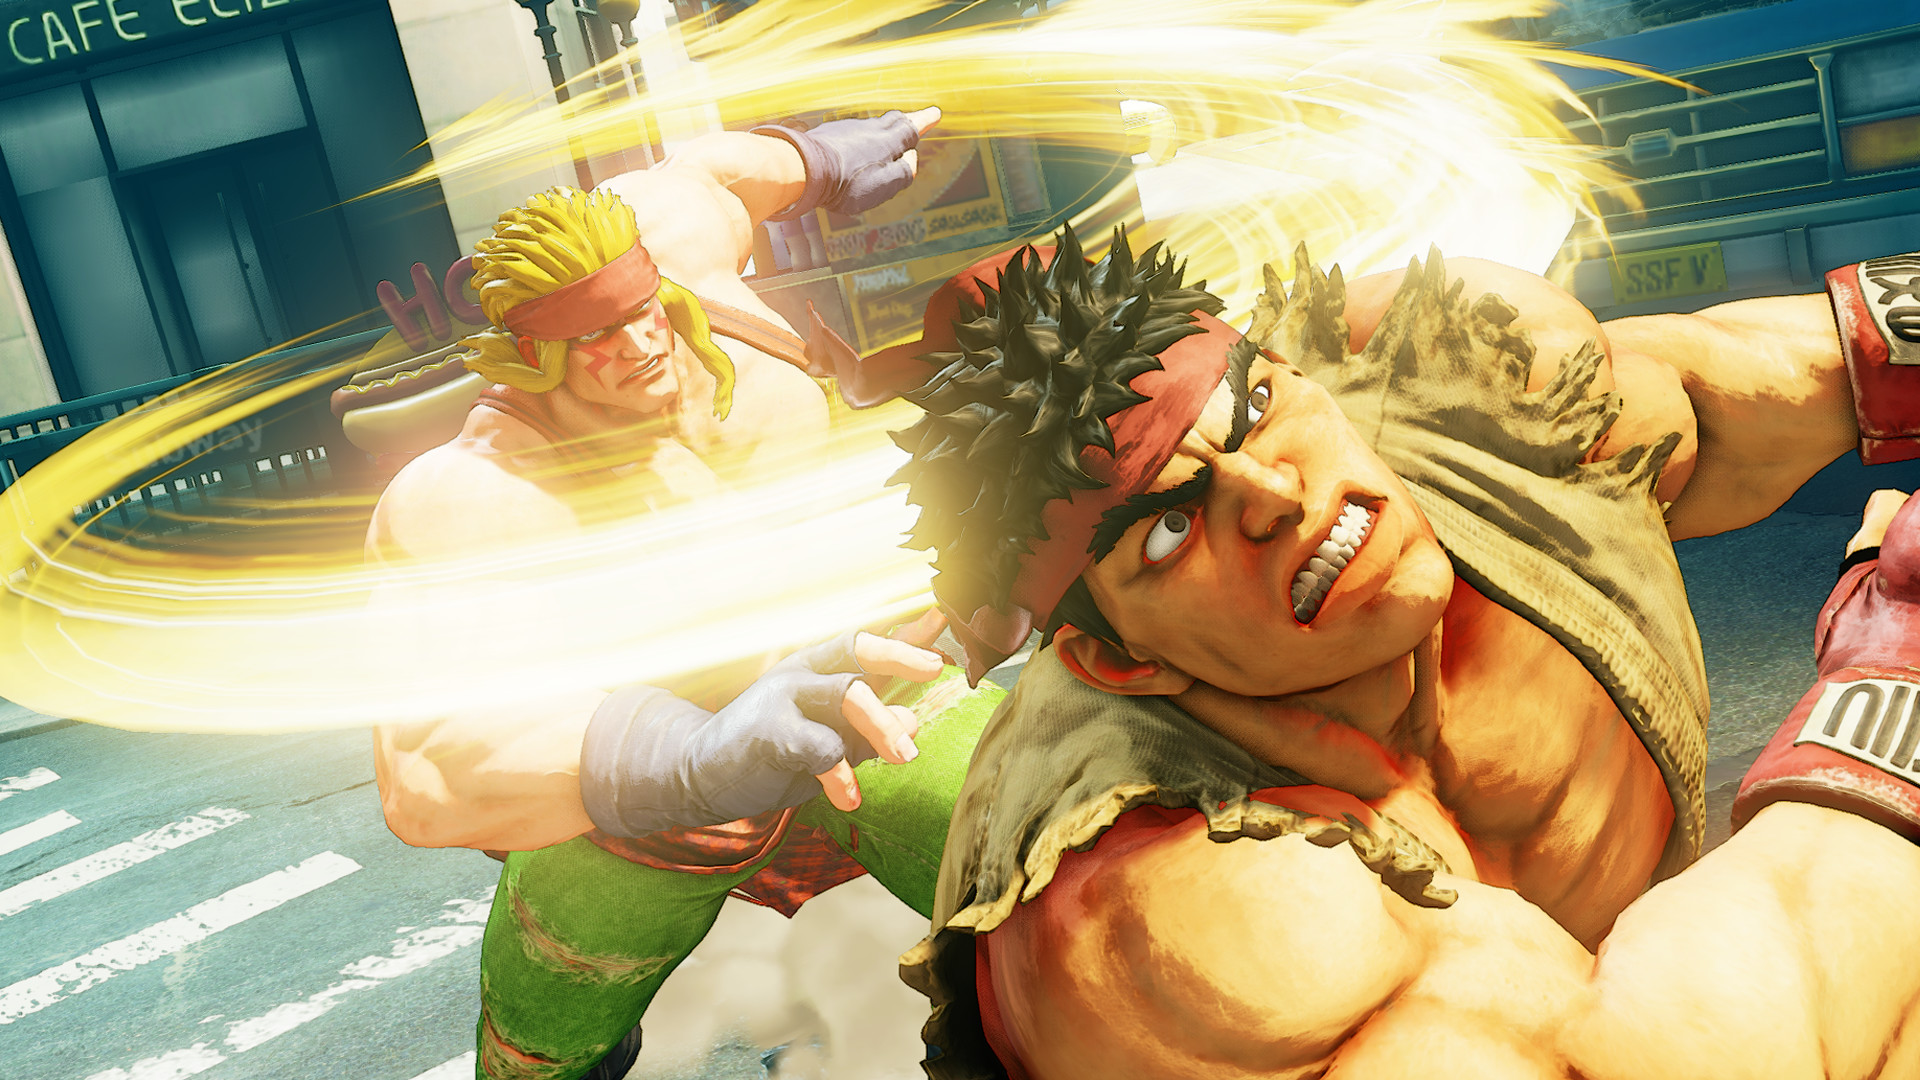  Street Fighter 5 receives 'definitive update' featuring cel-shaded visuals 